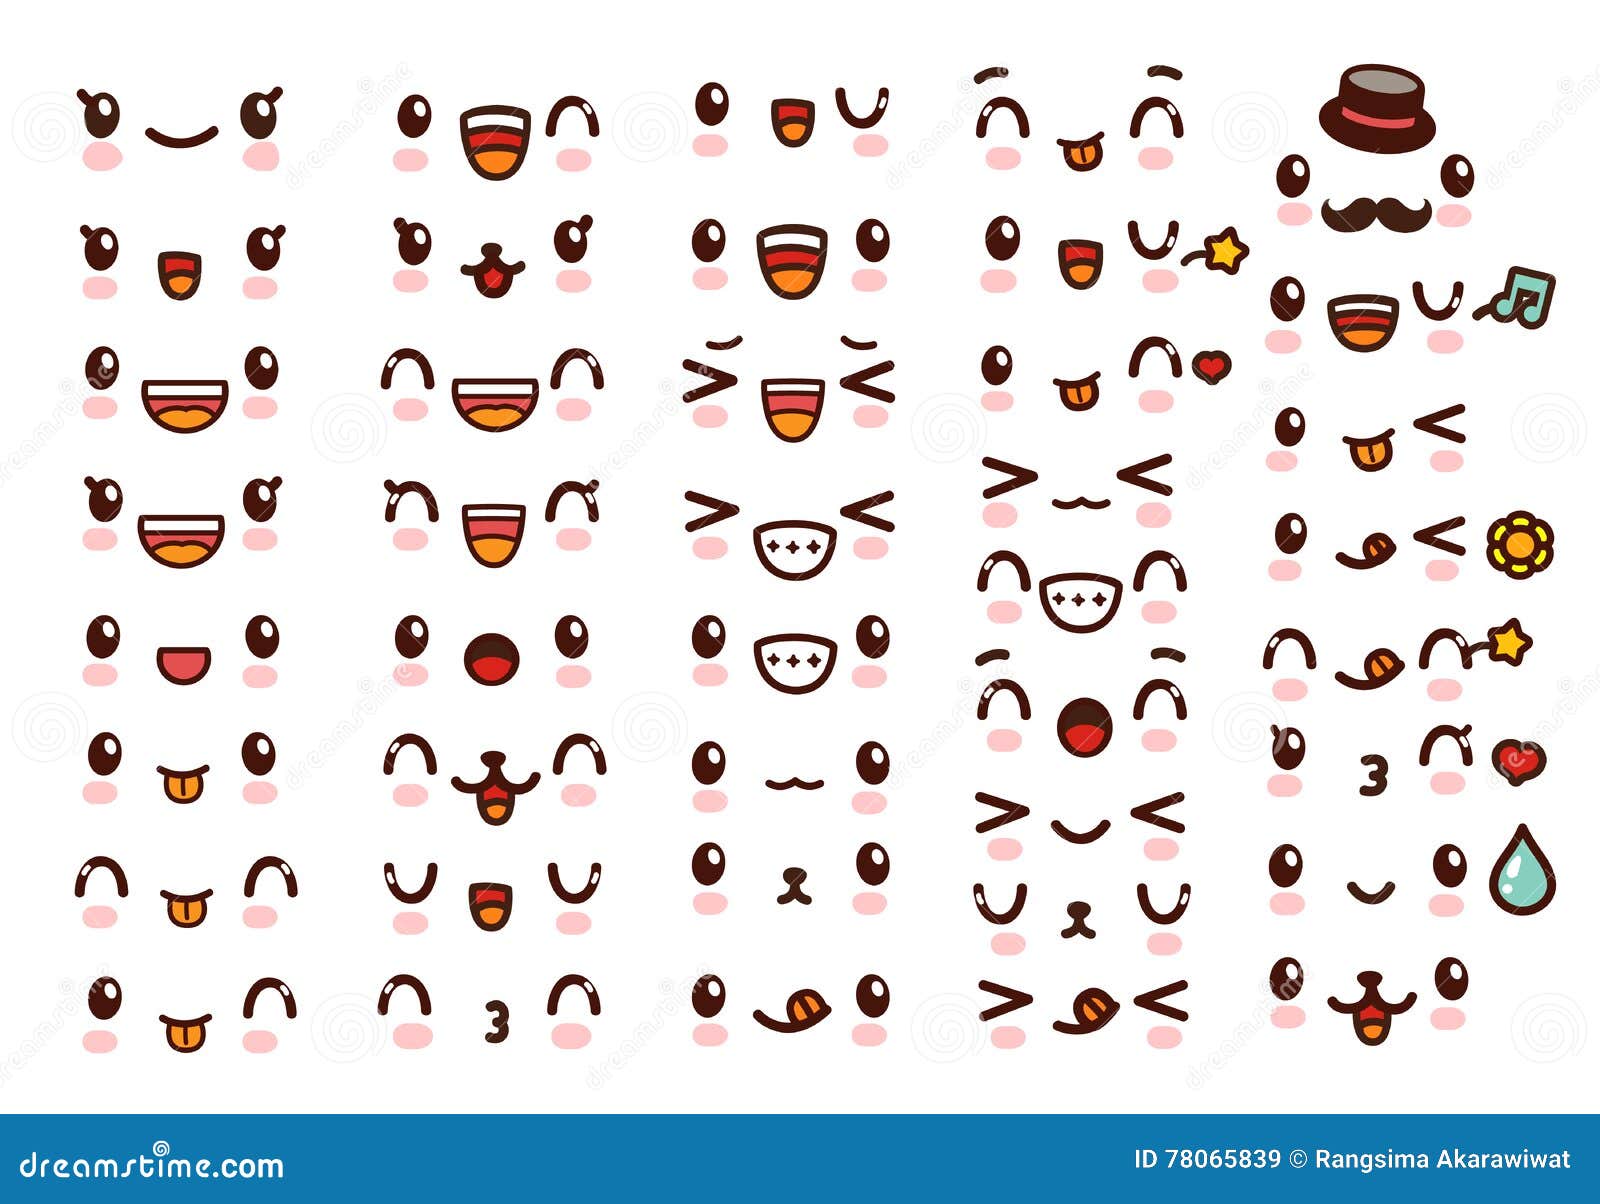 collection of cute lovely kawaii emoticon emoji doodle